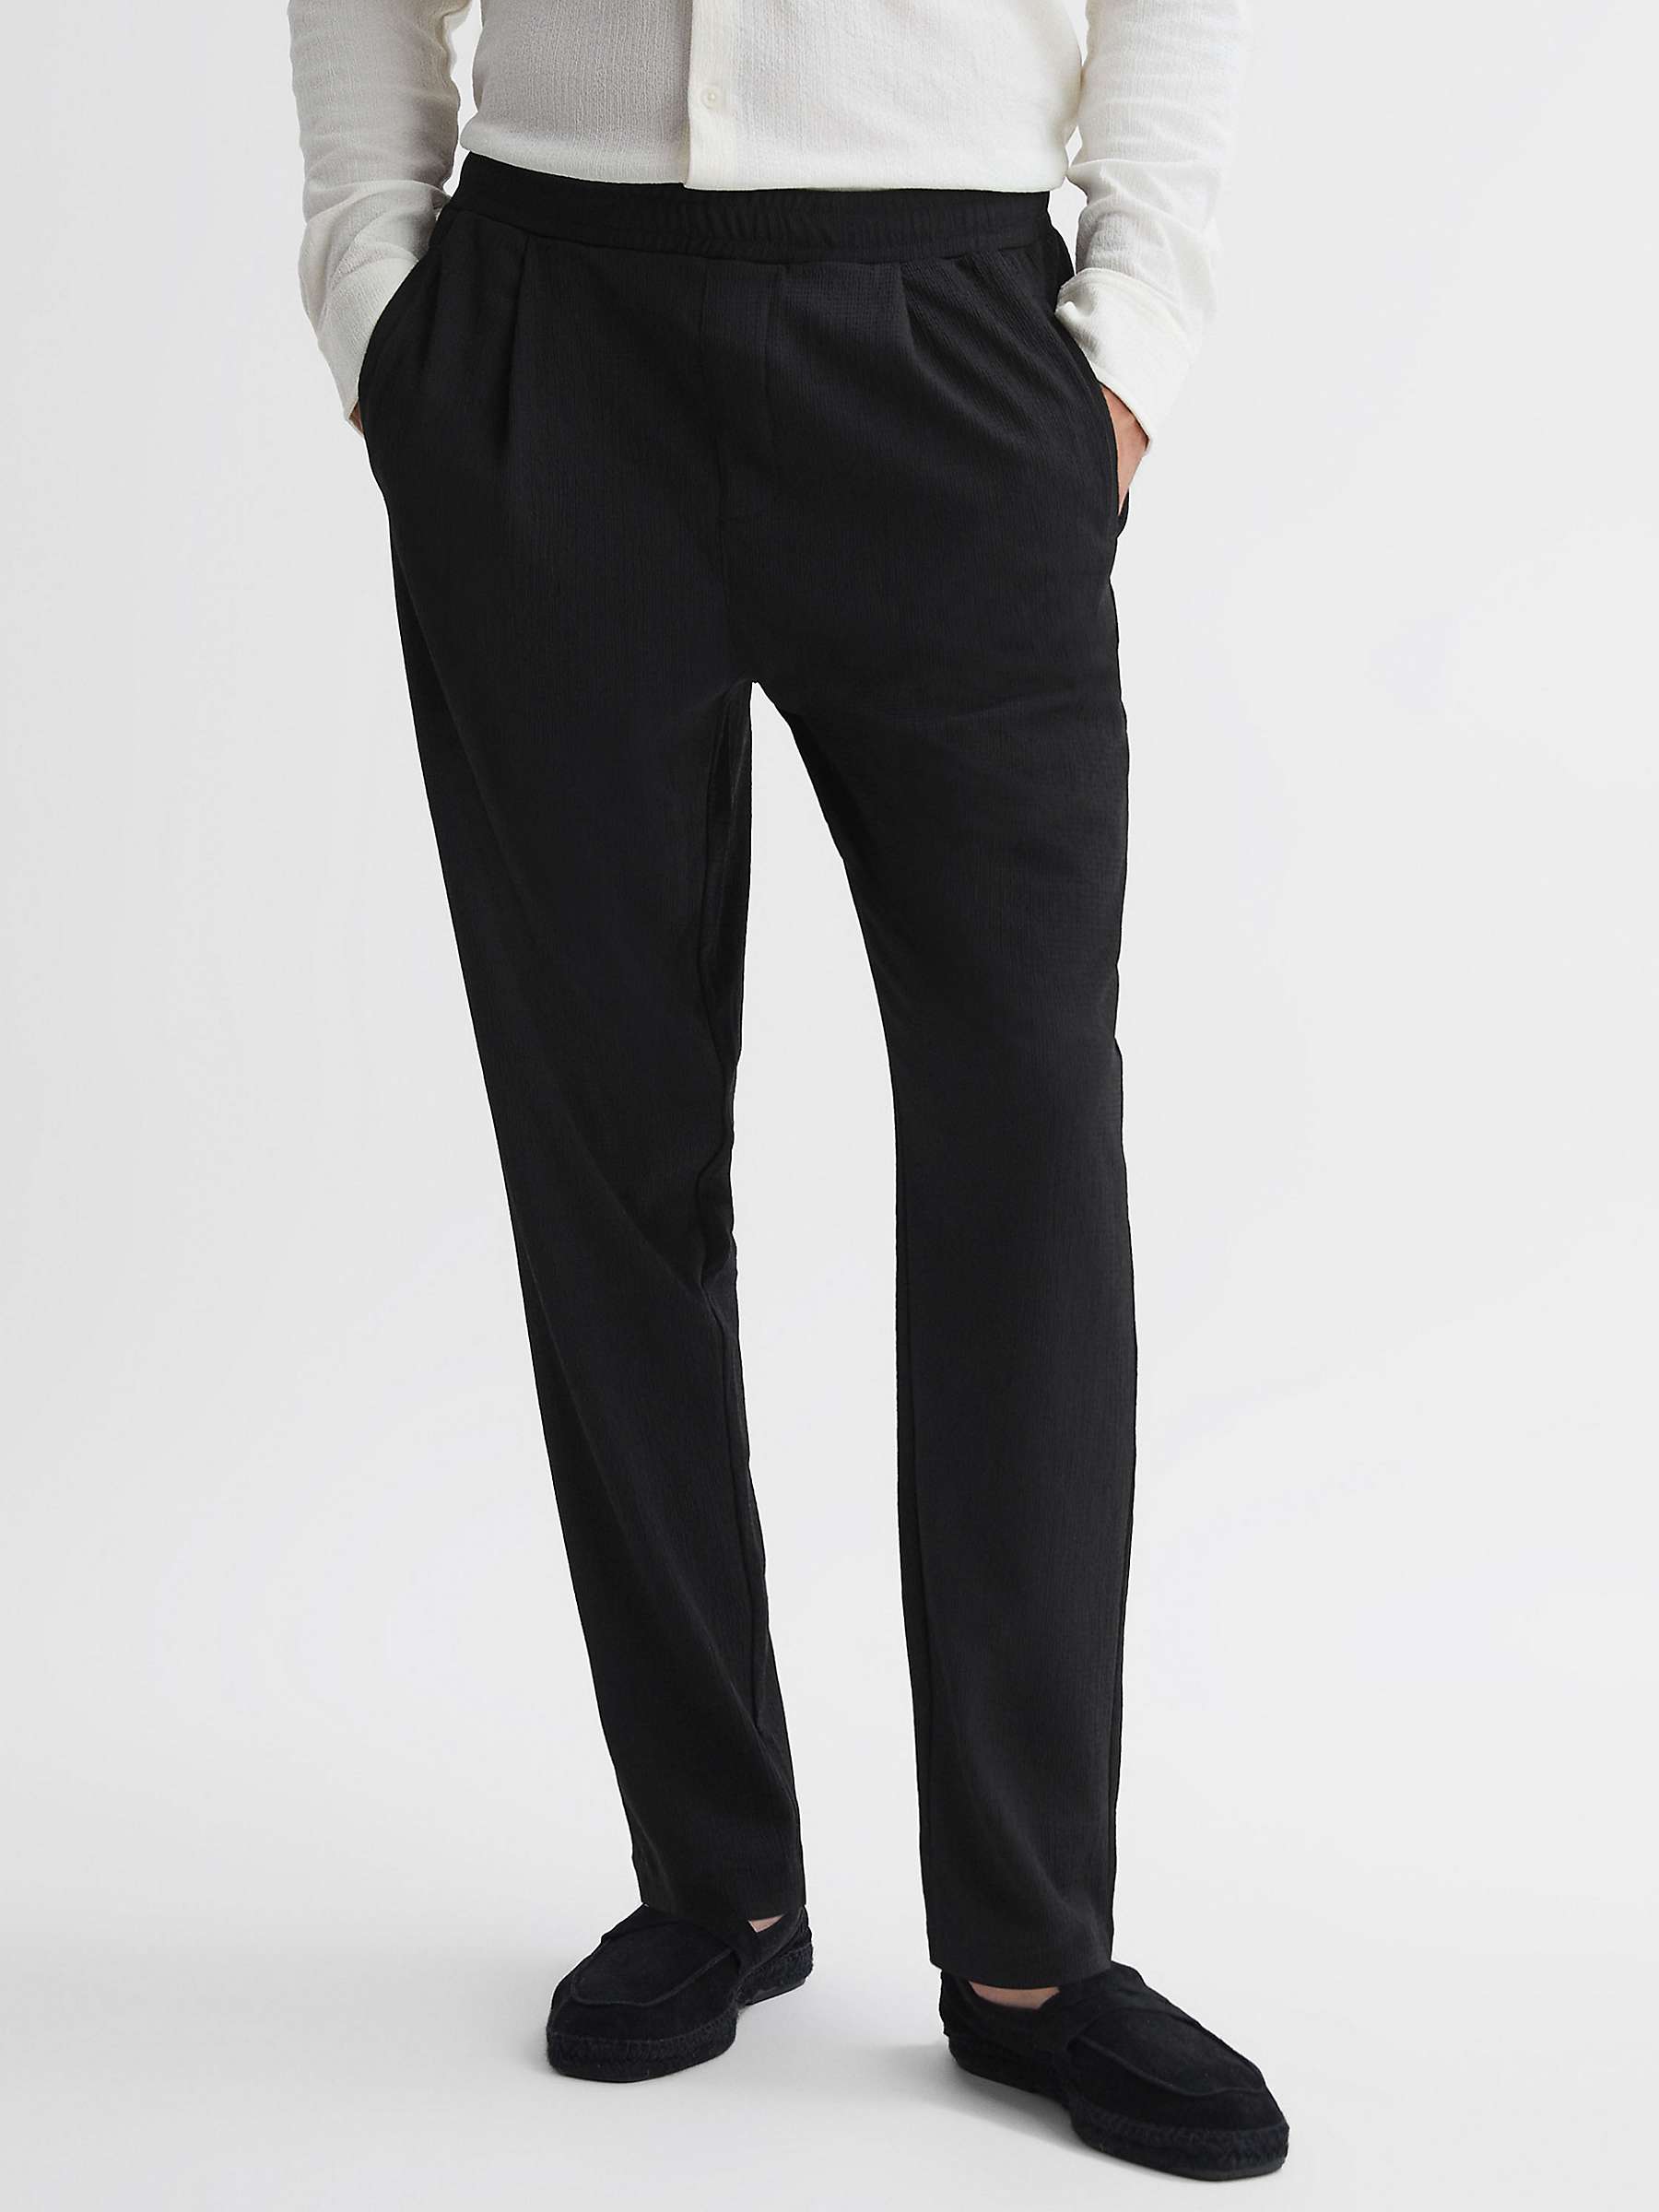 Reiss Hiroshio Textured Tapered Trousers, Black at John Lewis & Partners